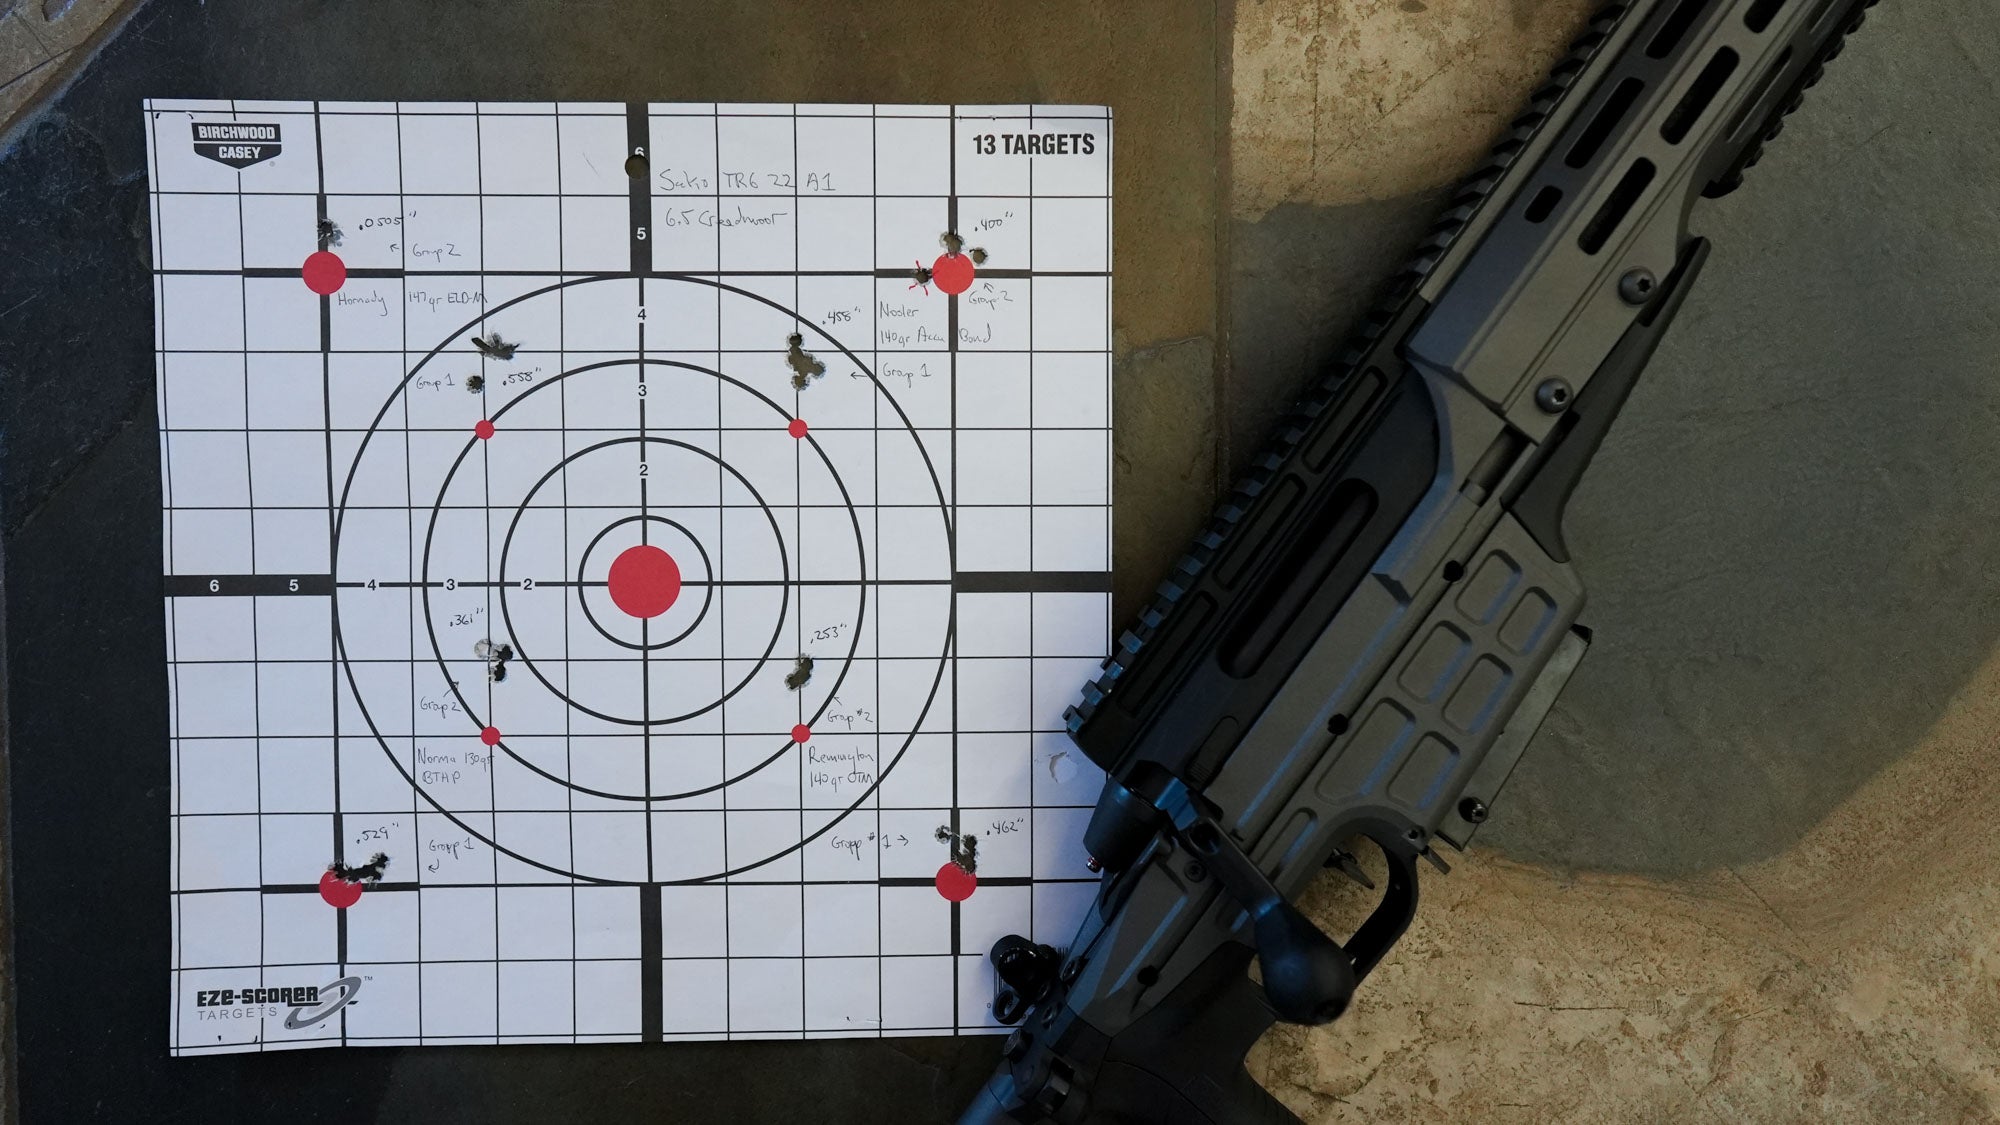 The Sako TRG 22 A1 turned in some exceptional groups with factory 6.5 Creedmoor ammo. 